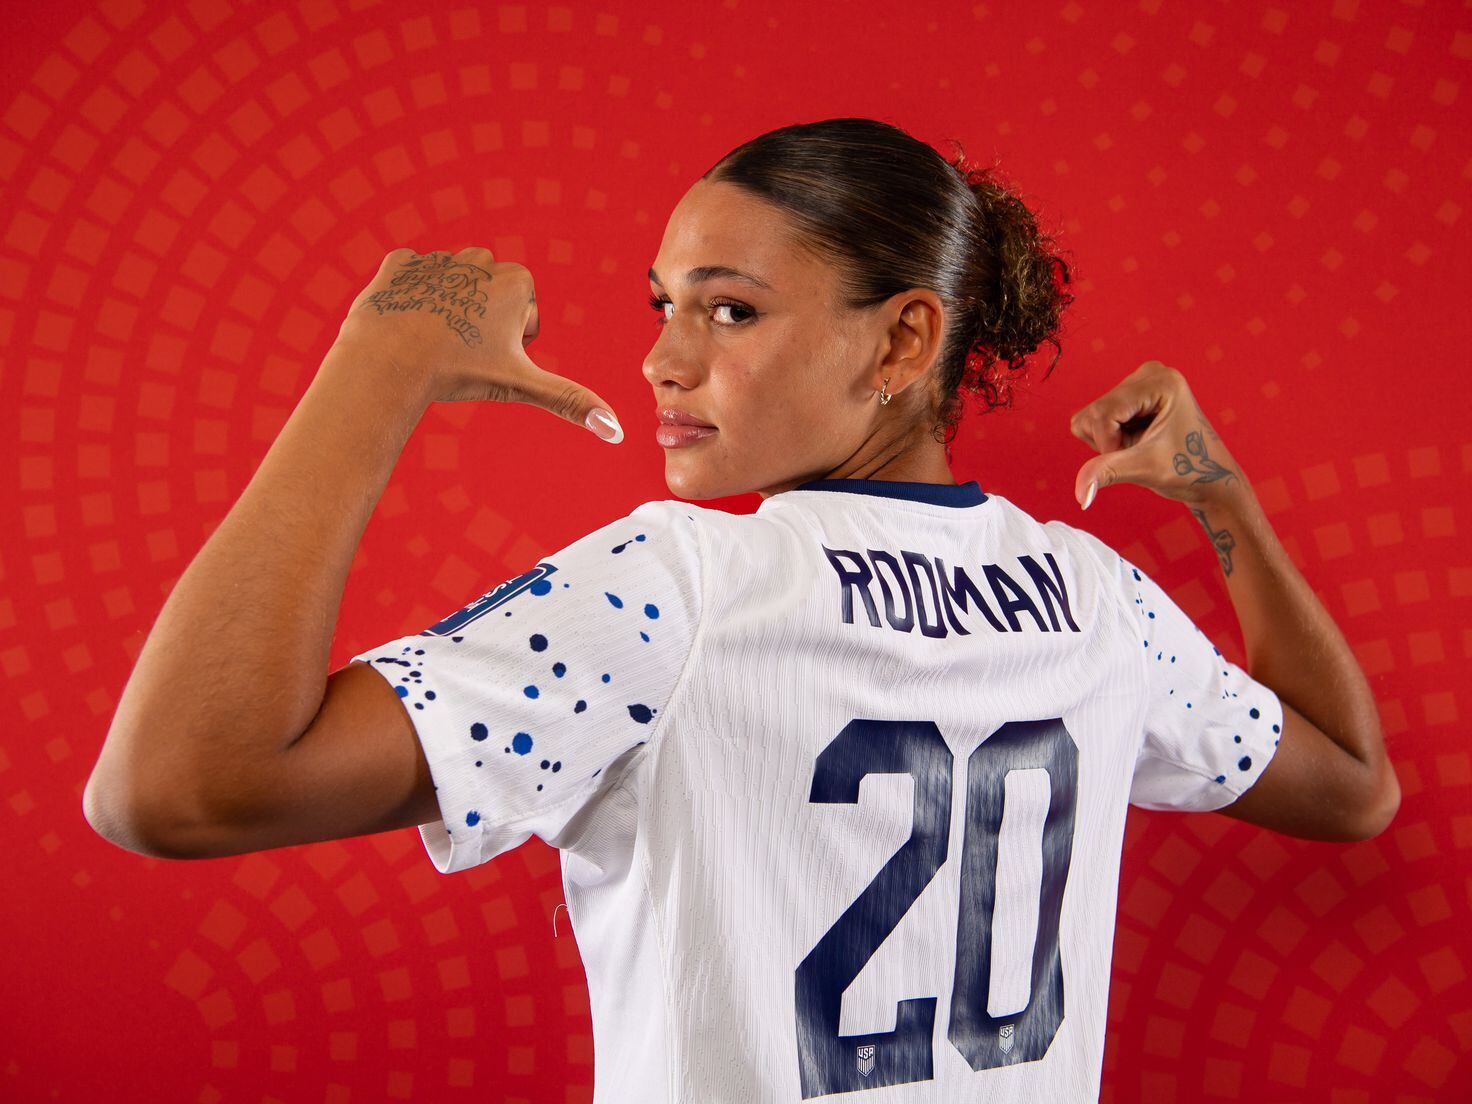 USWNT beats Wales 2-0 behind Trinity Rodman brace in World Cup send-off  match - SoccerWire